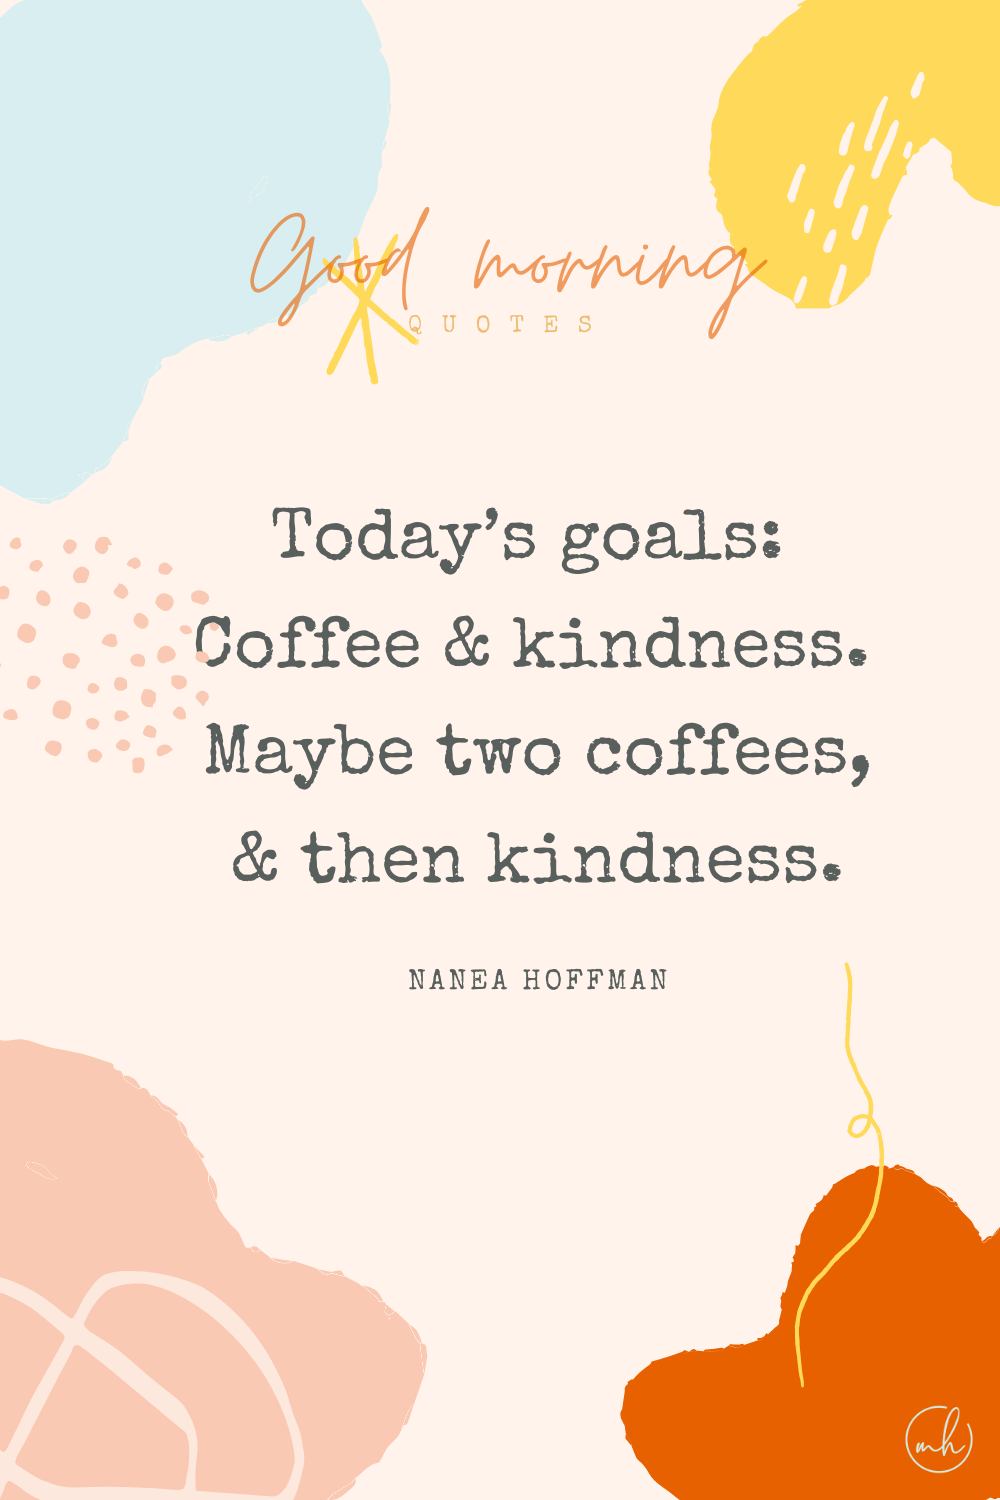 "Today’s goals: Coffee and kindness. Maybe two coffees, and then kindness." – Nanea Hoffman